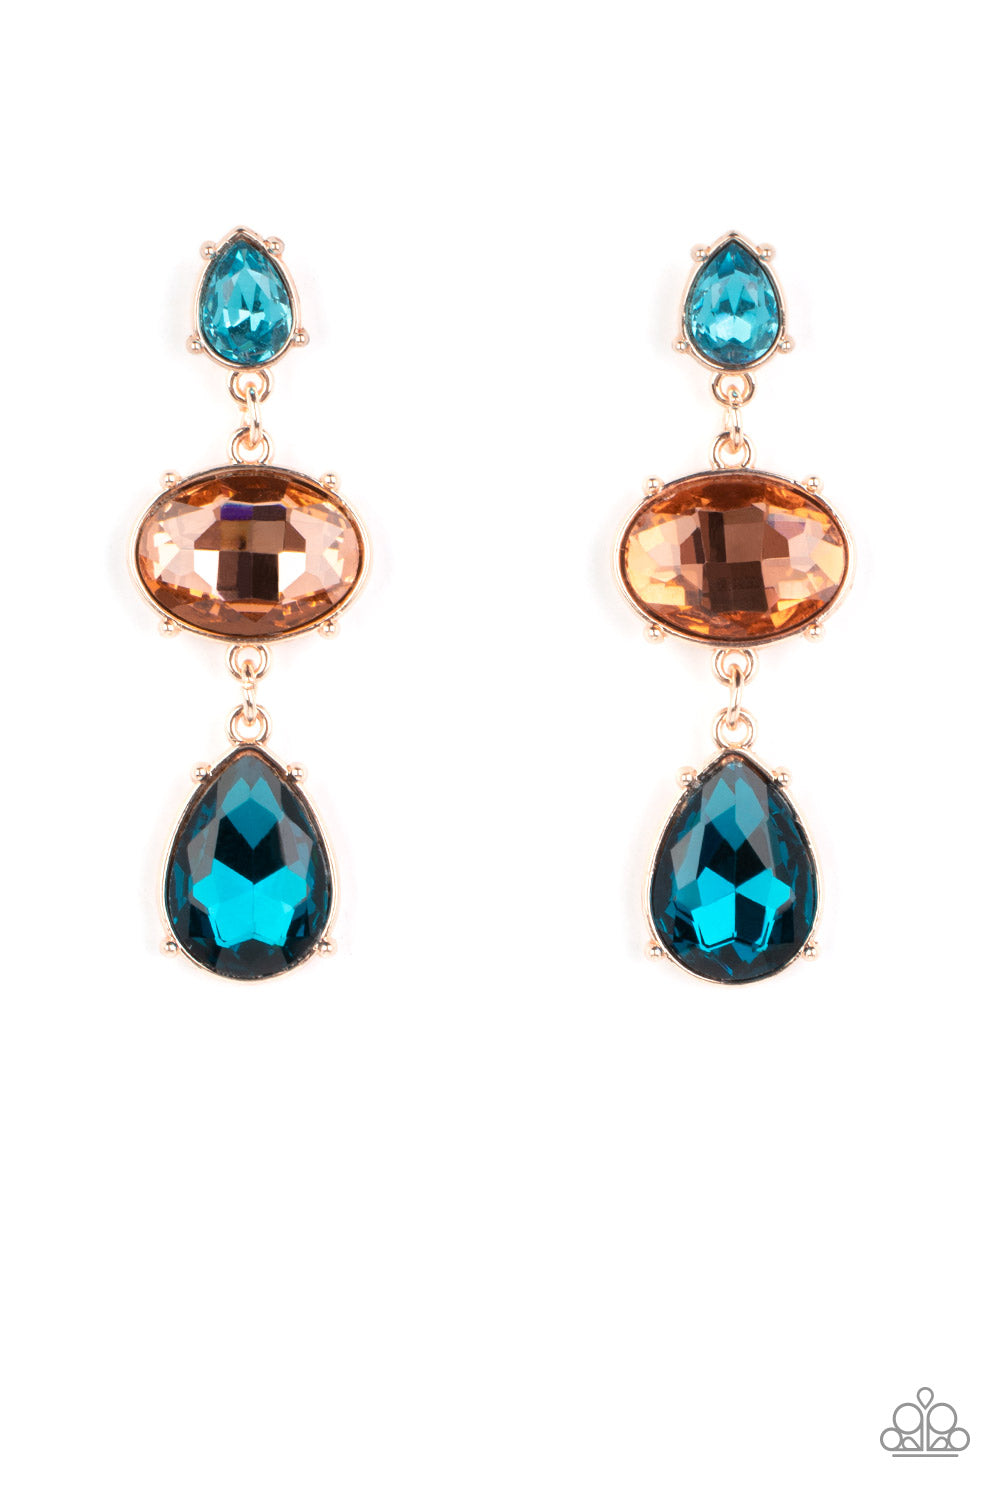 Paparazzi Accessories - Royal Appeal Multi Earrings - September 2022 LOP a small, light blue, teardrop-shaped gem gives way to a peachy oval-shaped rhinestone tilted on its side. A large, deep blue teardrop swings from the oval above, adding dramatic movement to the colorful display. Each faceted gem is set in pronged rose gold fittings, exaggerating their sparkle as they swing from the ear in a lustrous finish.  Sold as one pair of post earrings.